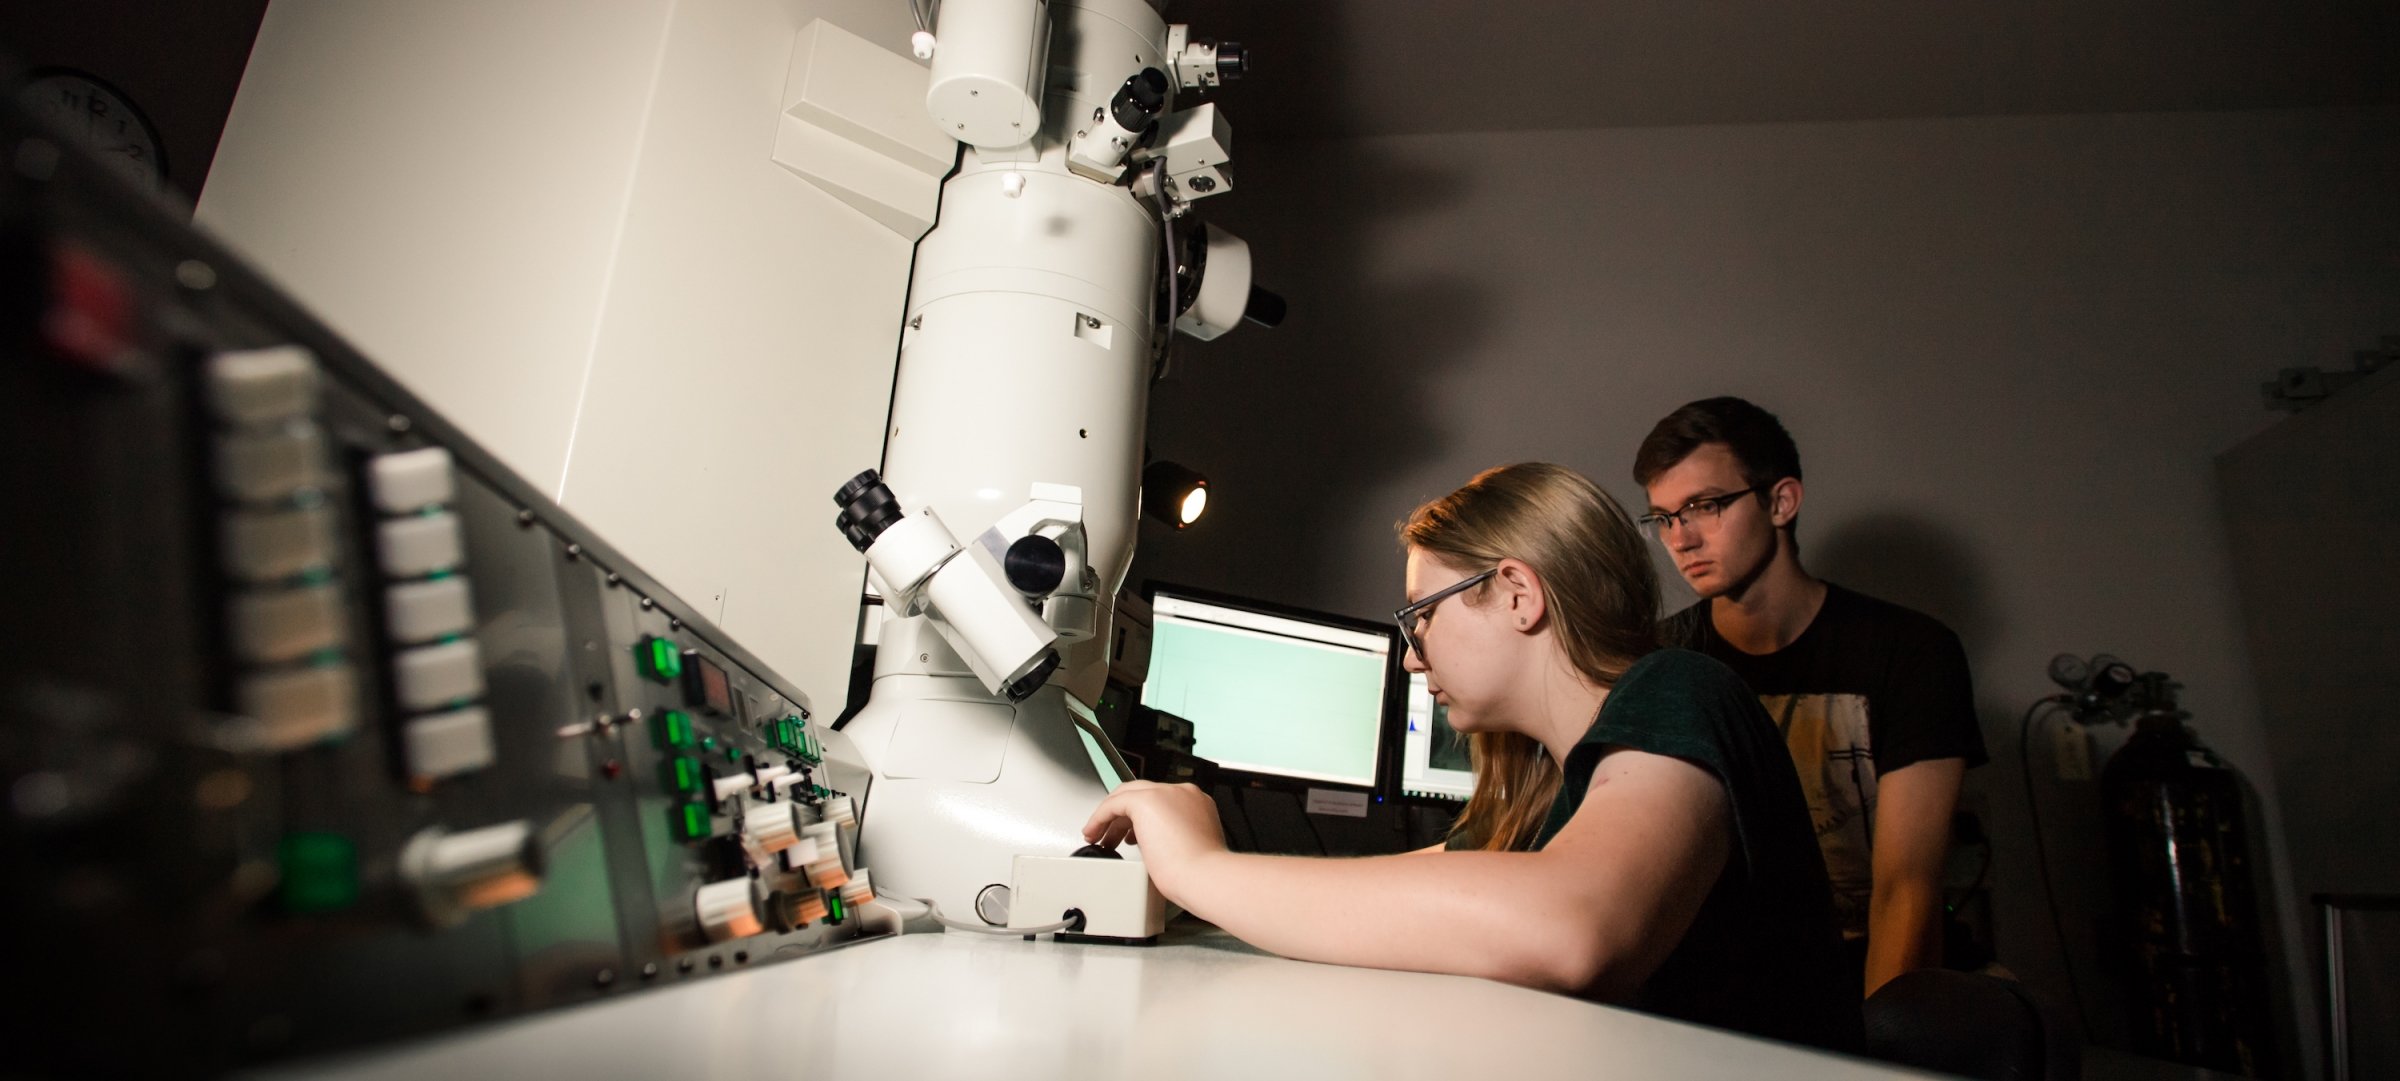 Students engage in advanced microscopy.